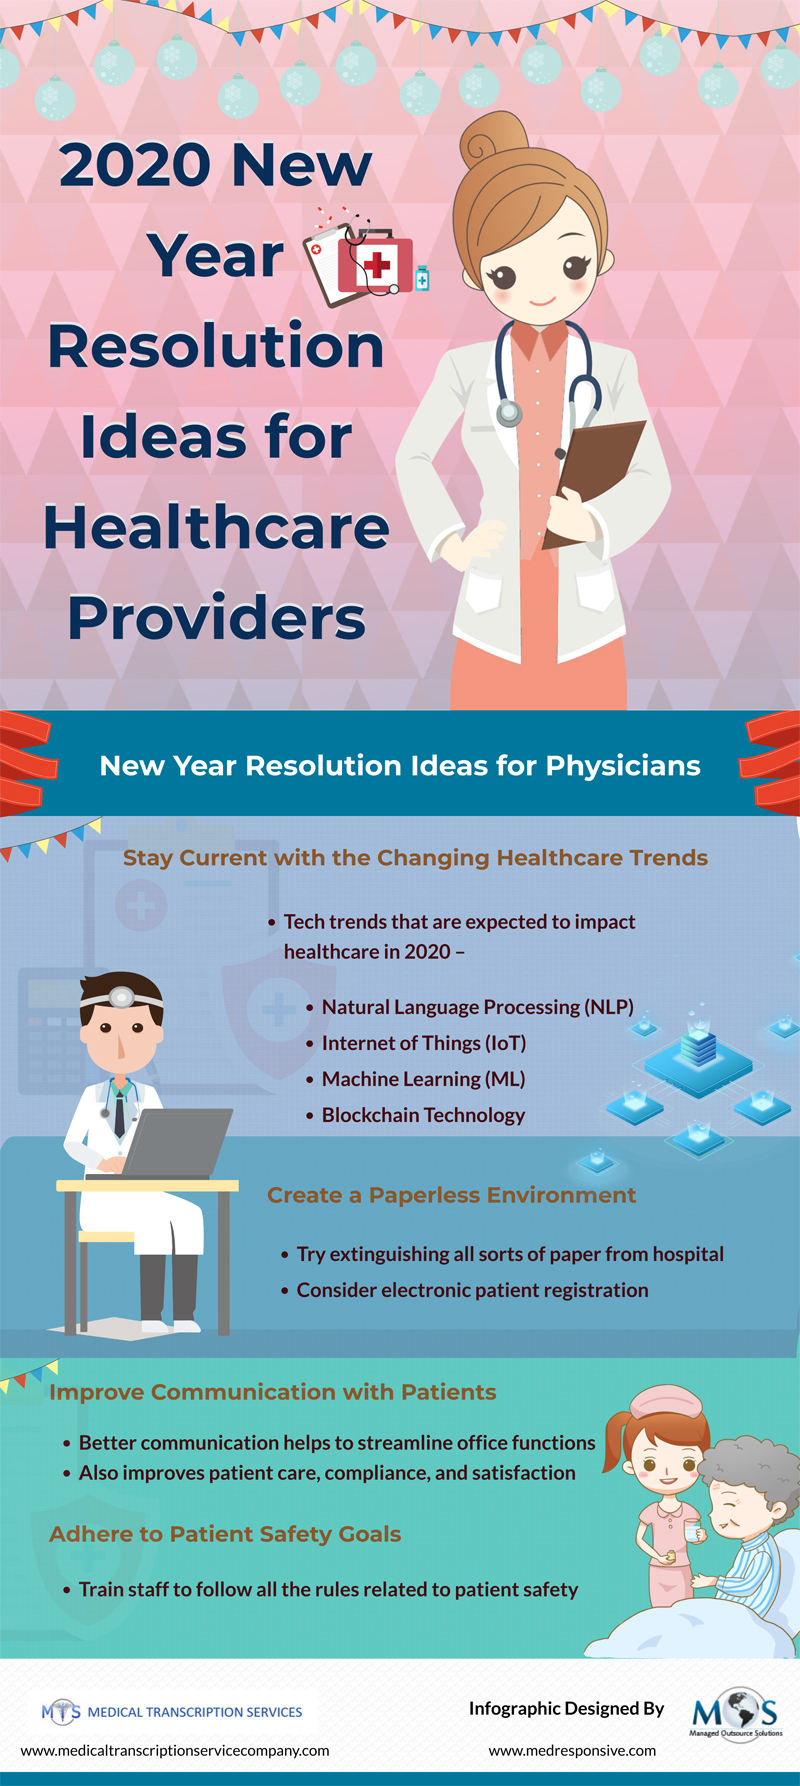 2020 New Year Resolution Ideas for Healthcare Providers